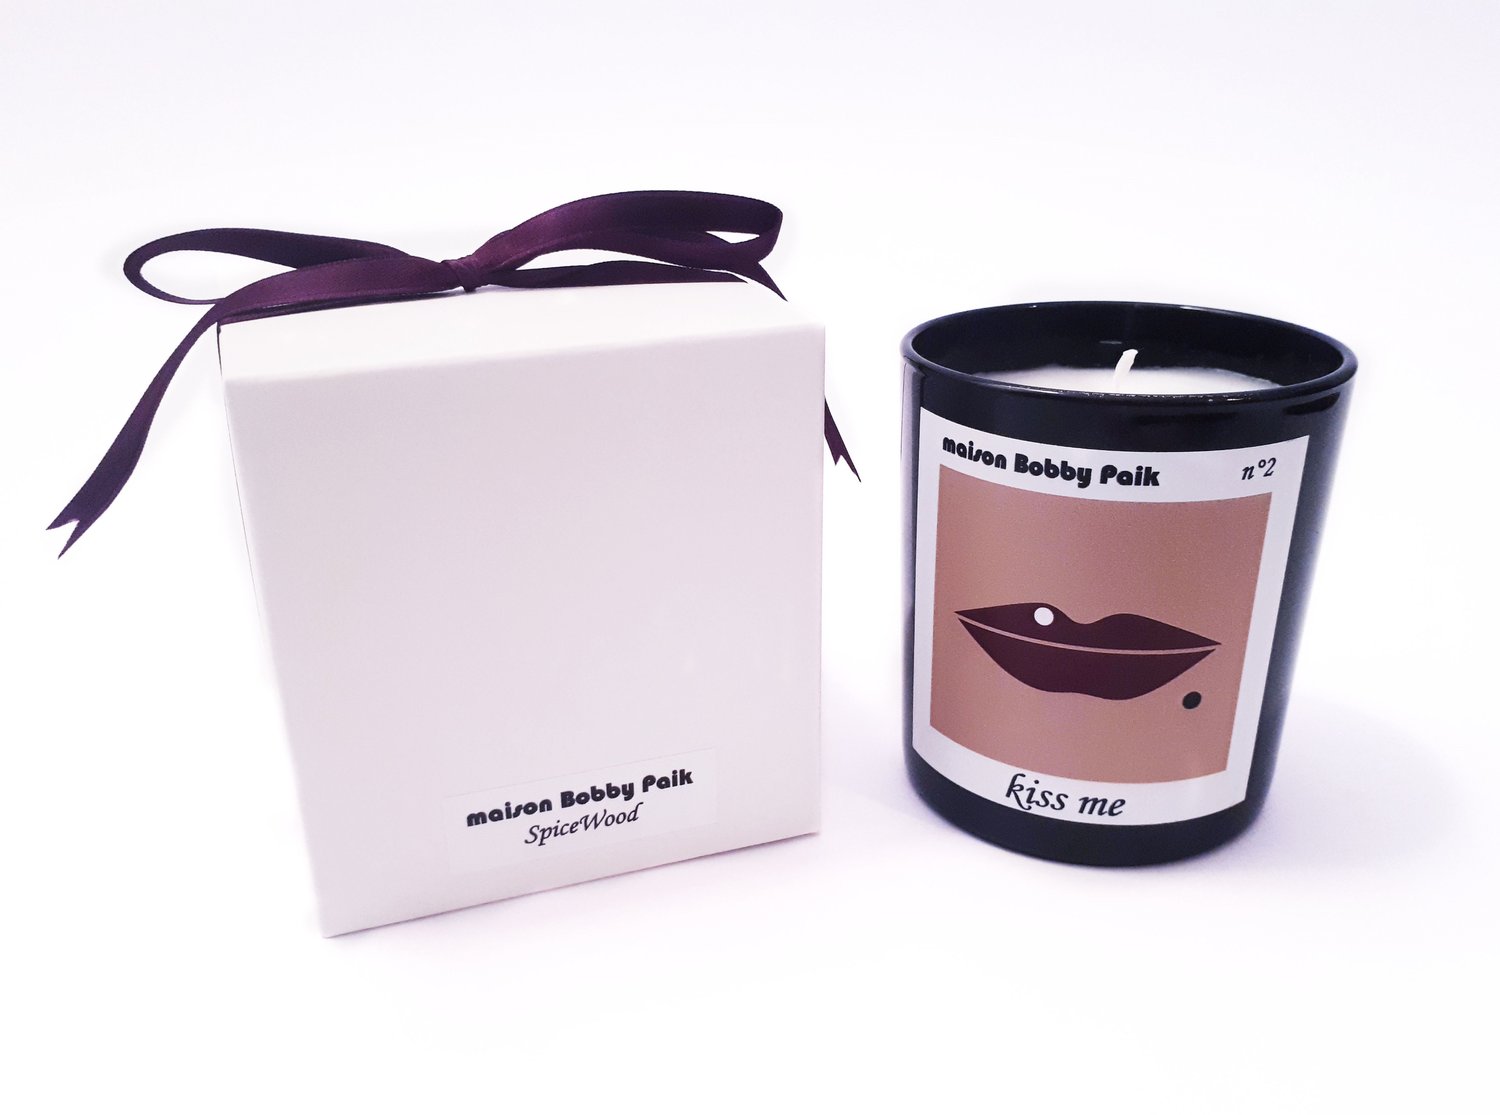 Image of Maison Bobby Paik SpiceWood Scented Candle-Kiss me black